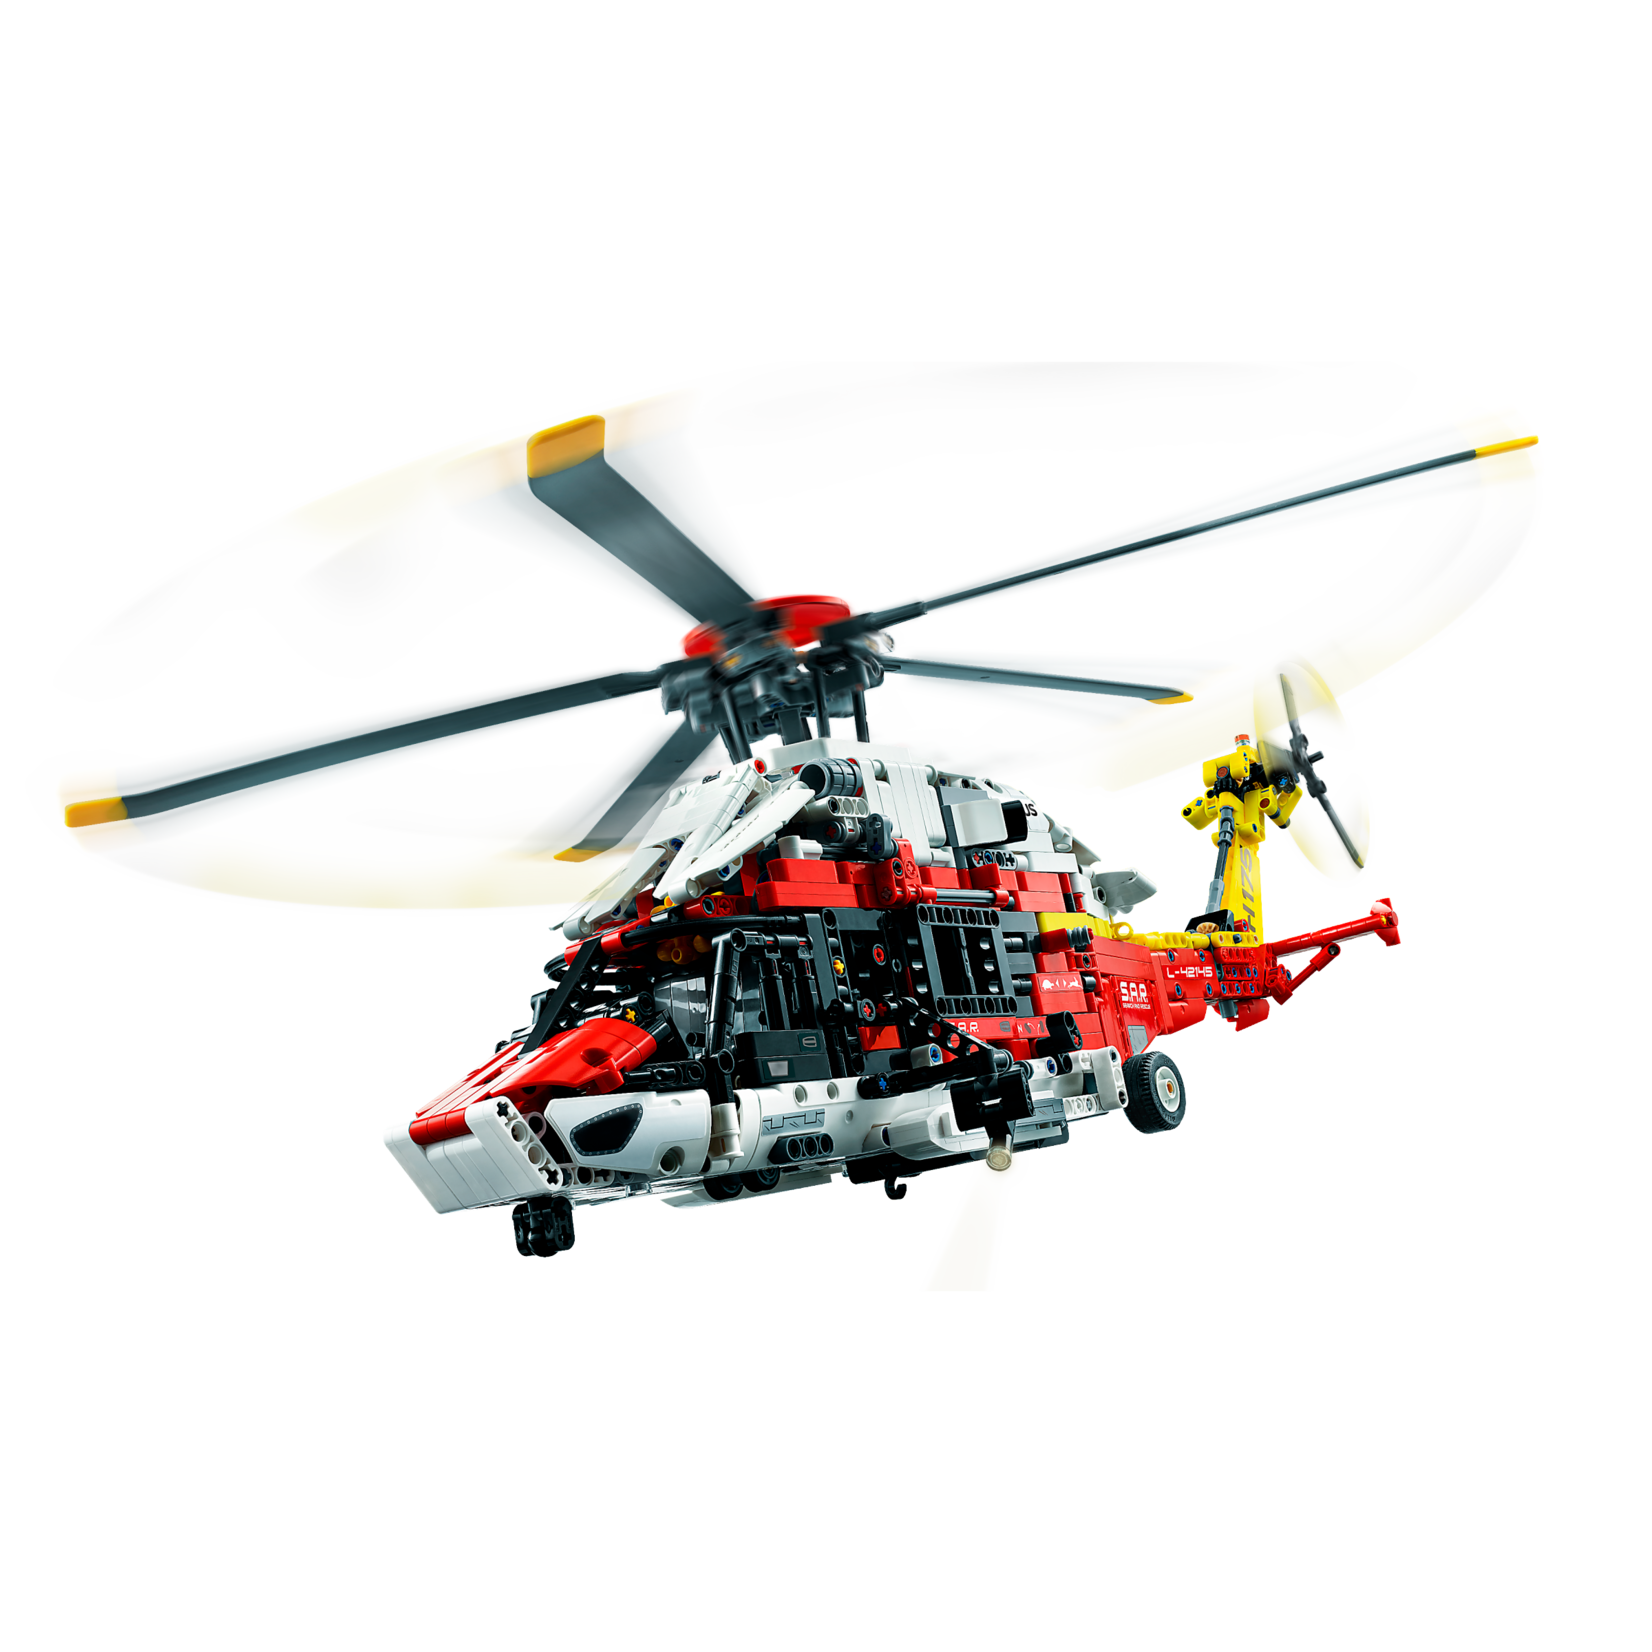 Lego Lego: Airbus H175 Rescue Helicopter 42145